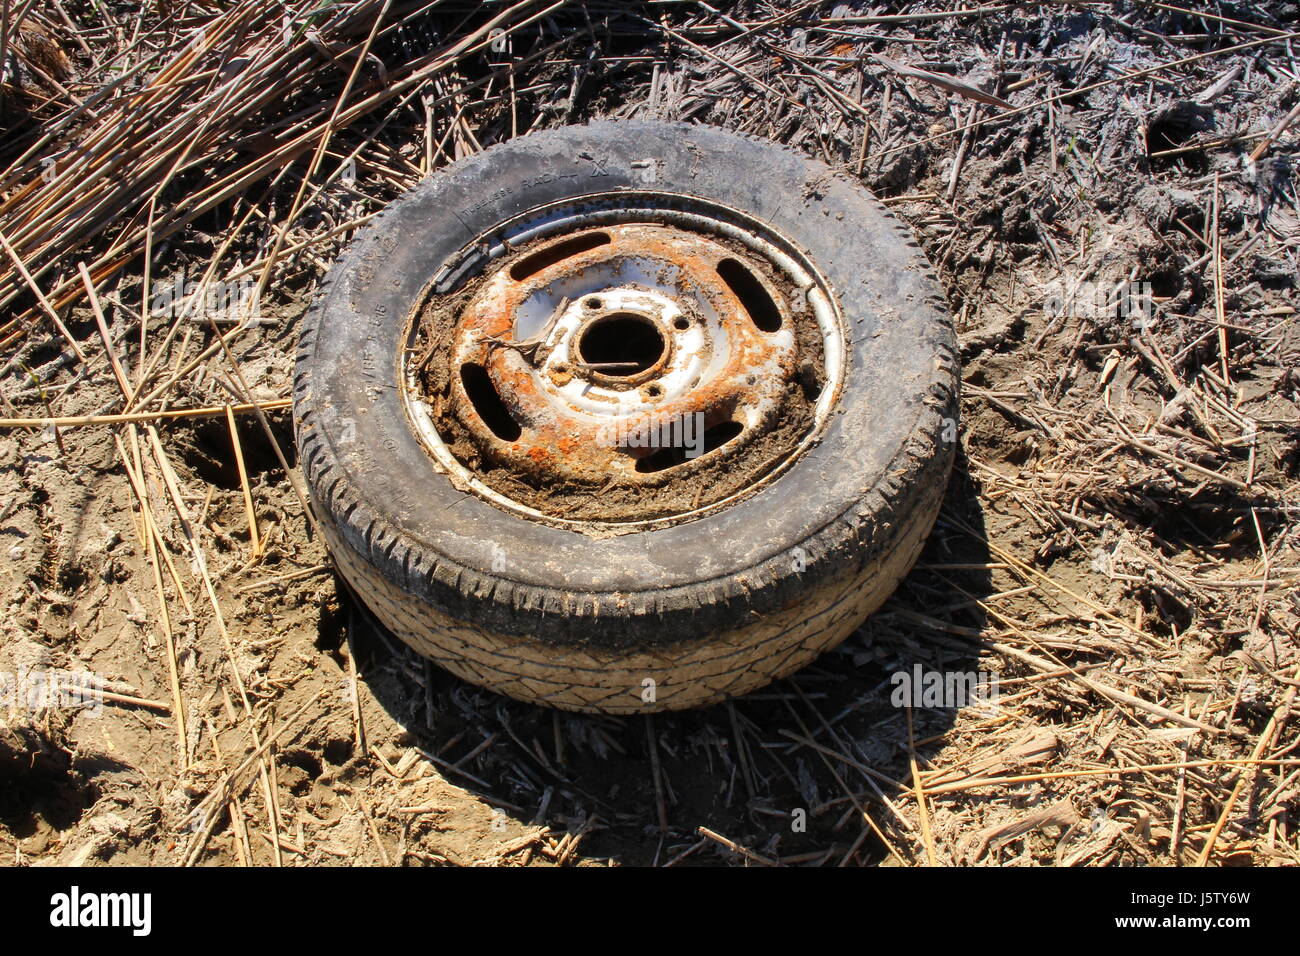 Used tire that pollutes nature Stock Photo